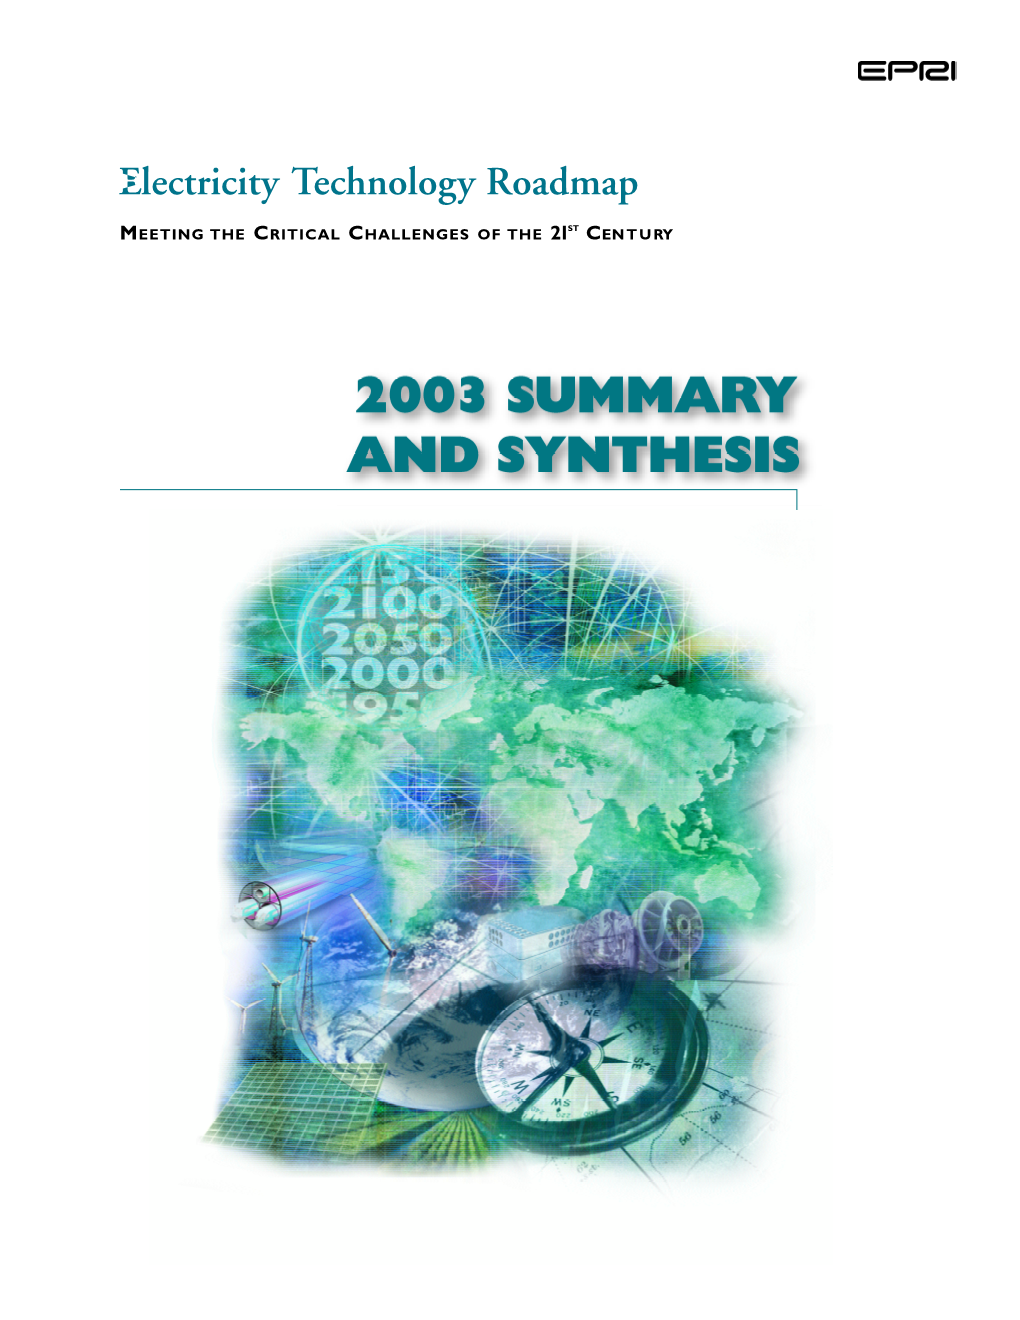 EPRI, Electricity Technology Roadmap: 1999 Summary and Synthesis, EPRI, August 1999